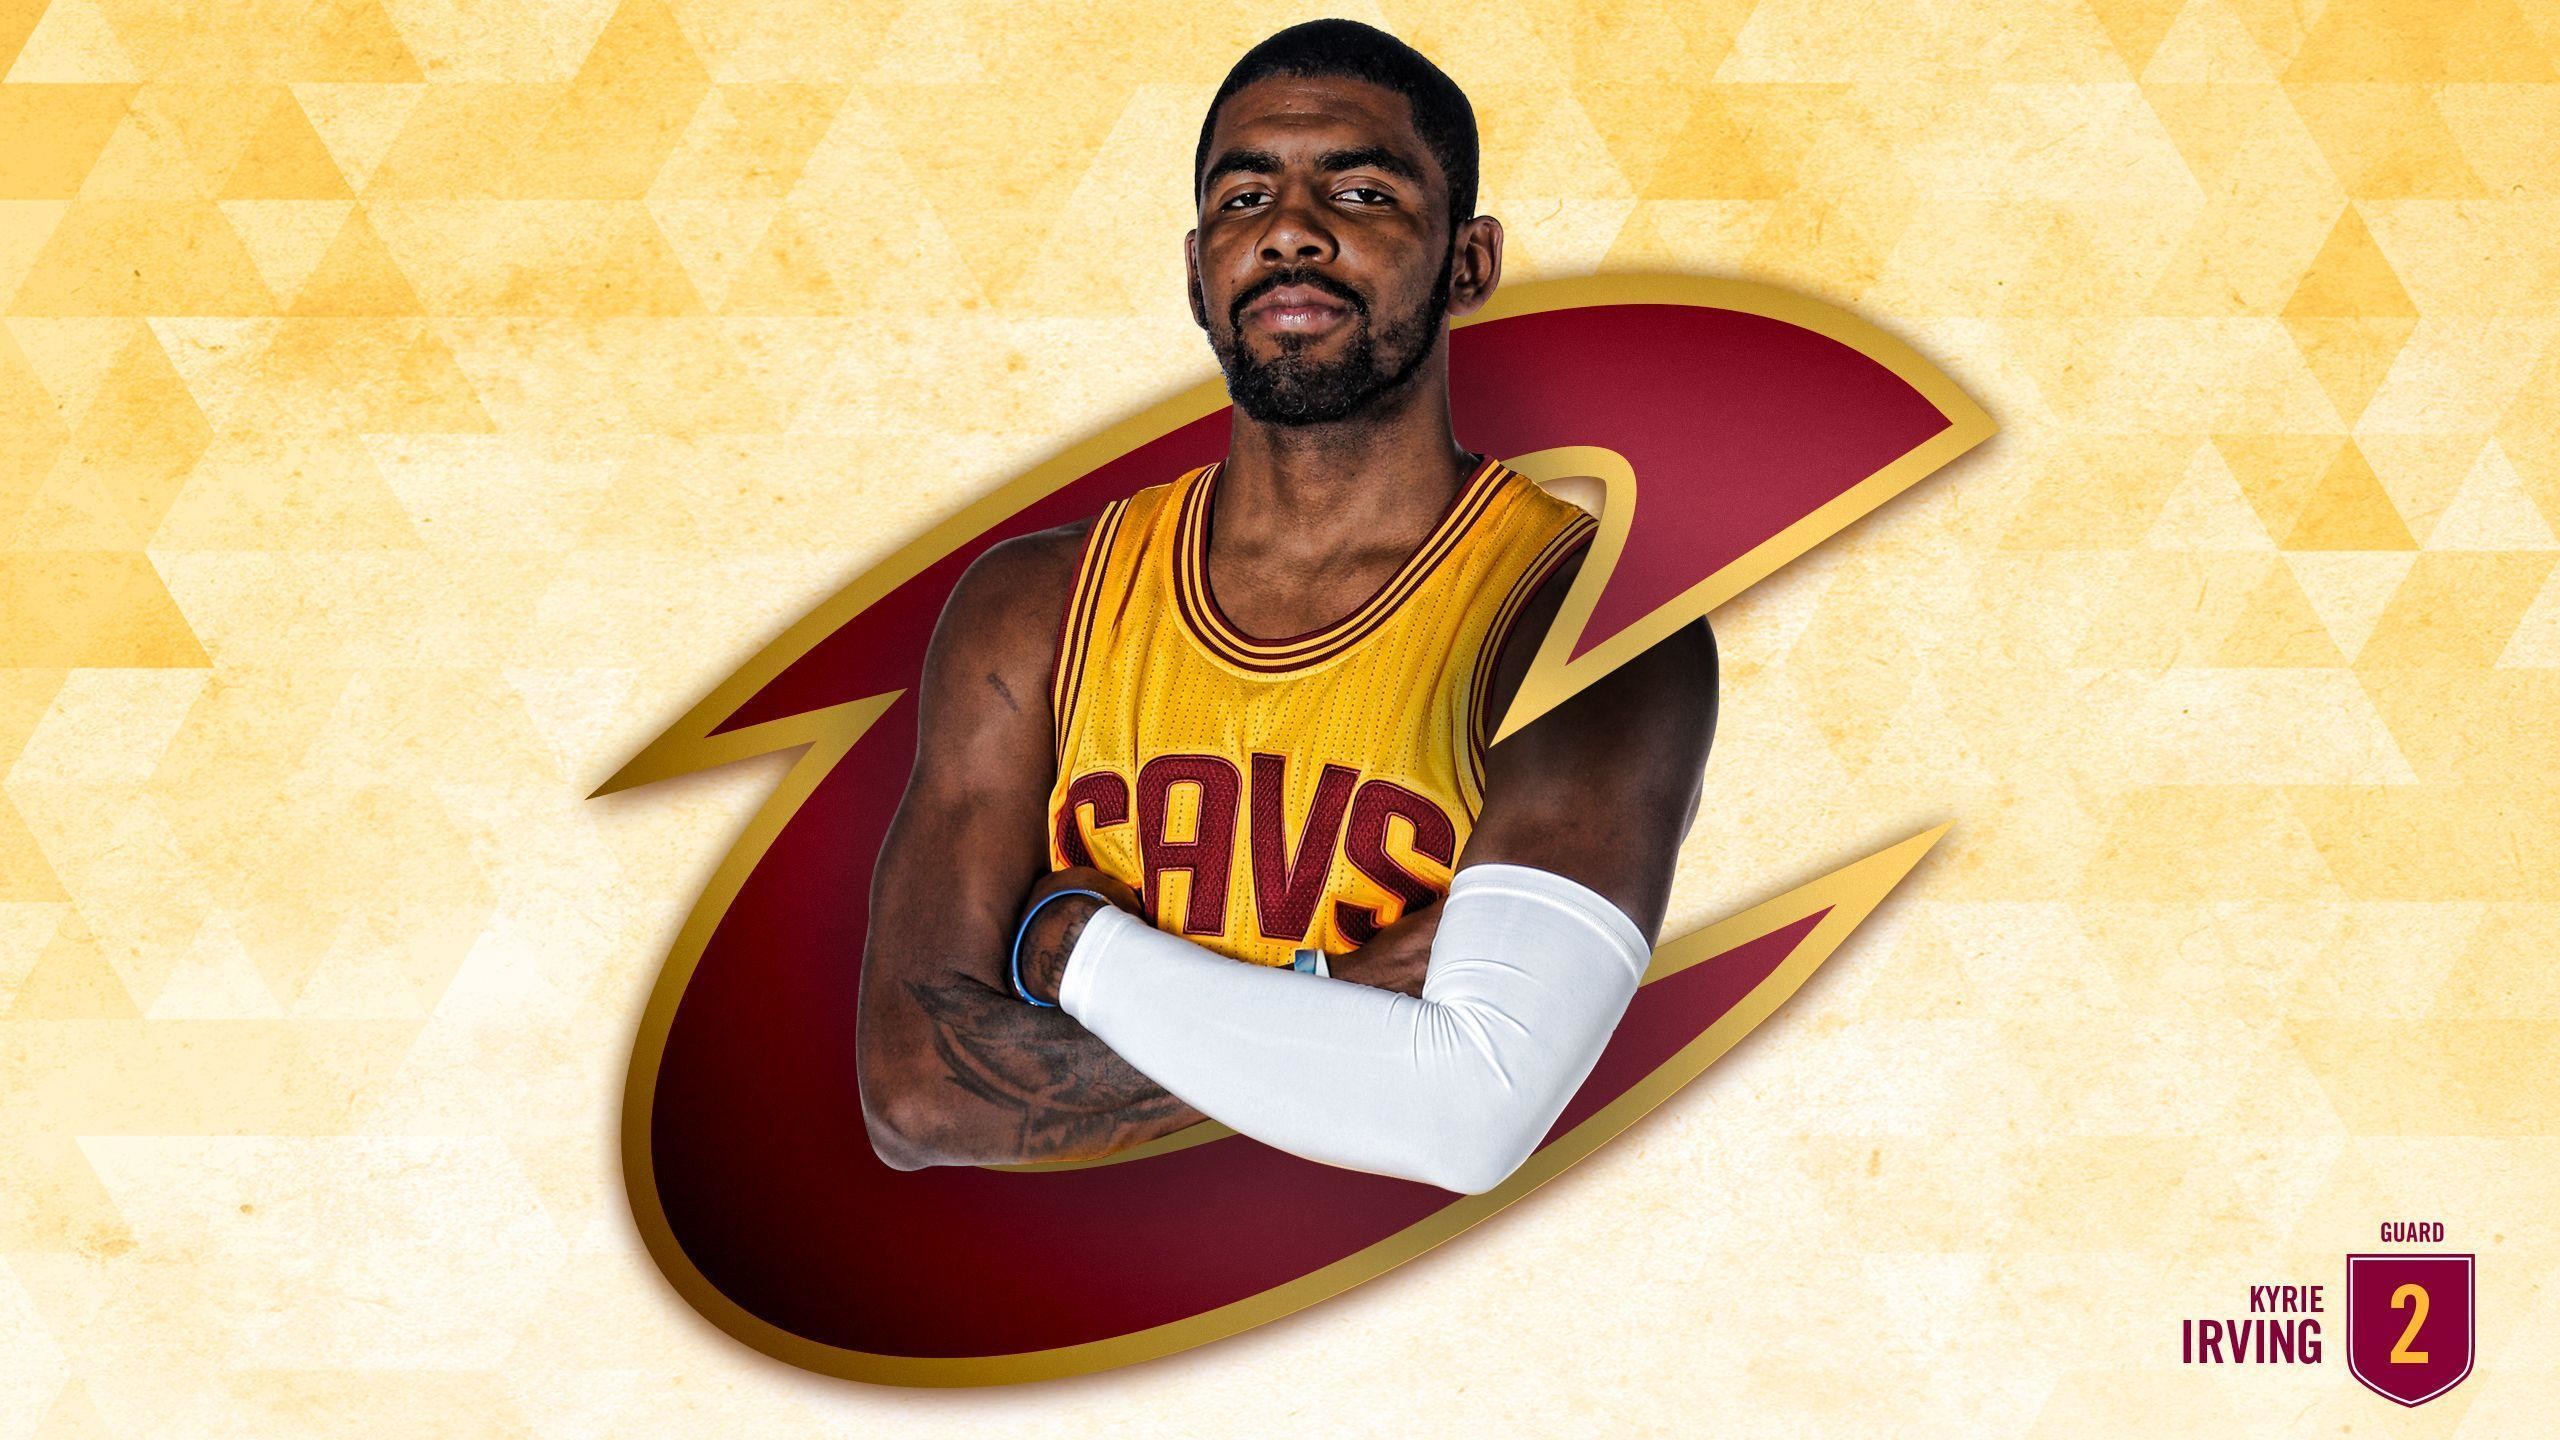 Kyrie Irving Cavs Wallpaper 75 images